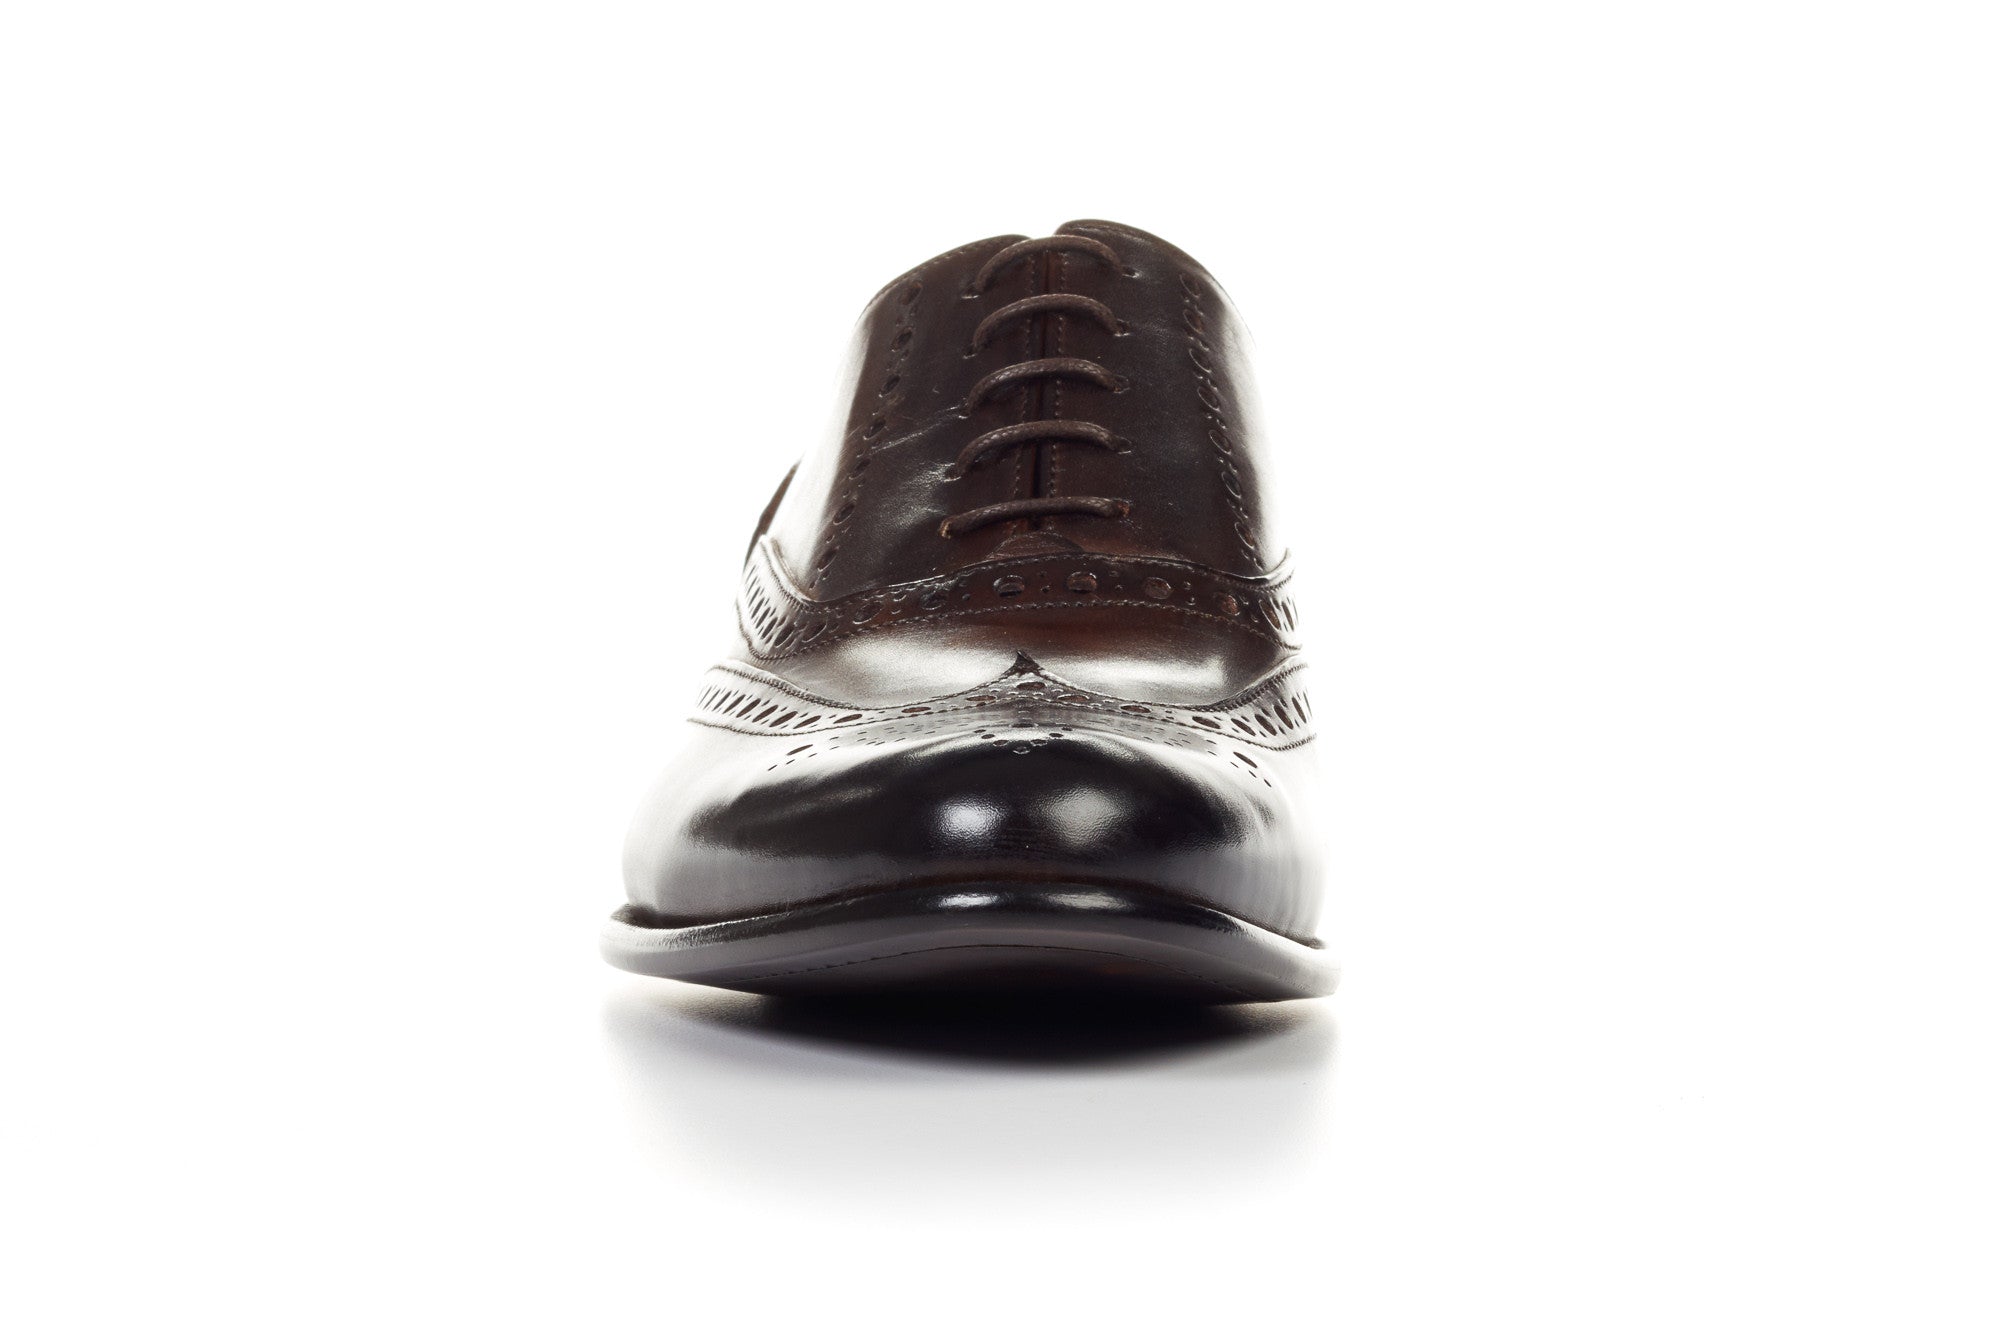 The West II Wingtip Oxford - Chocolate